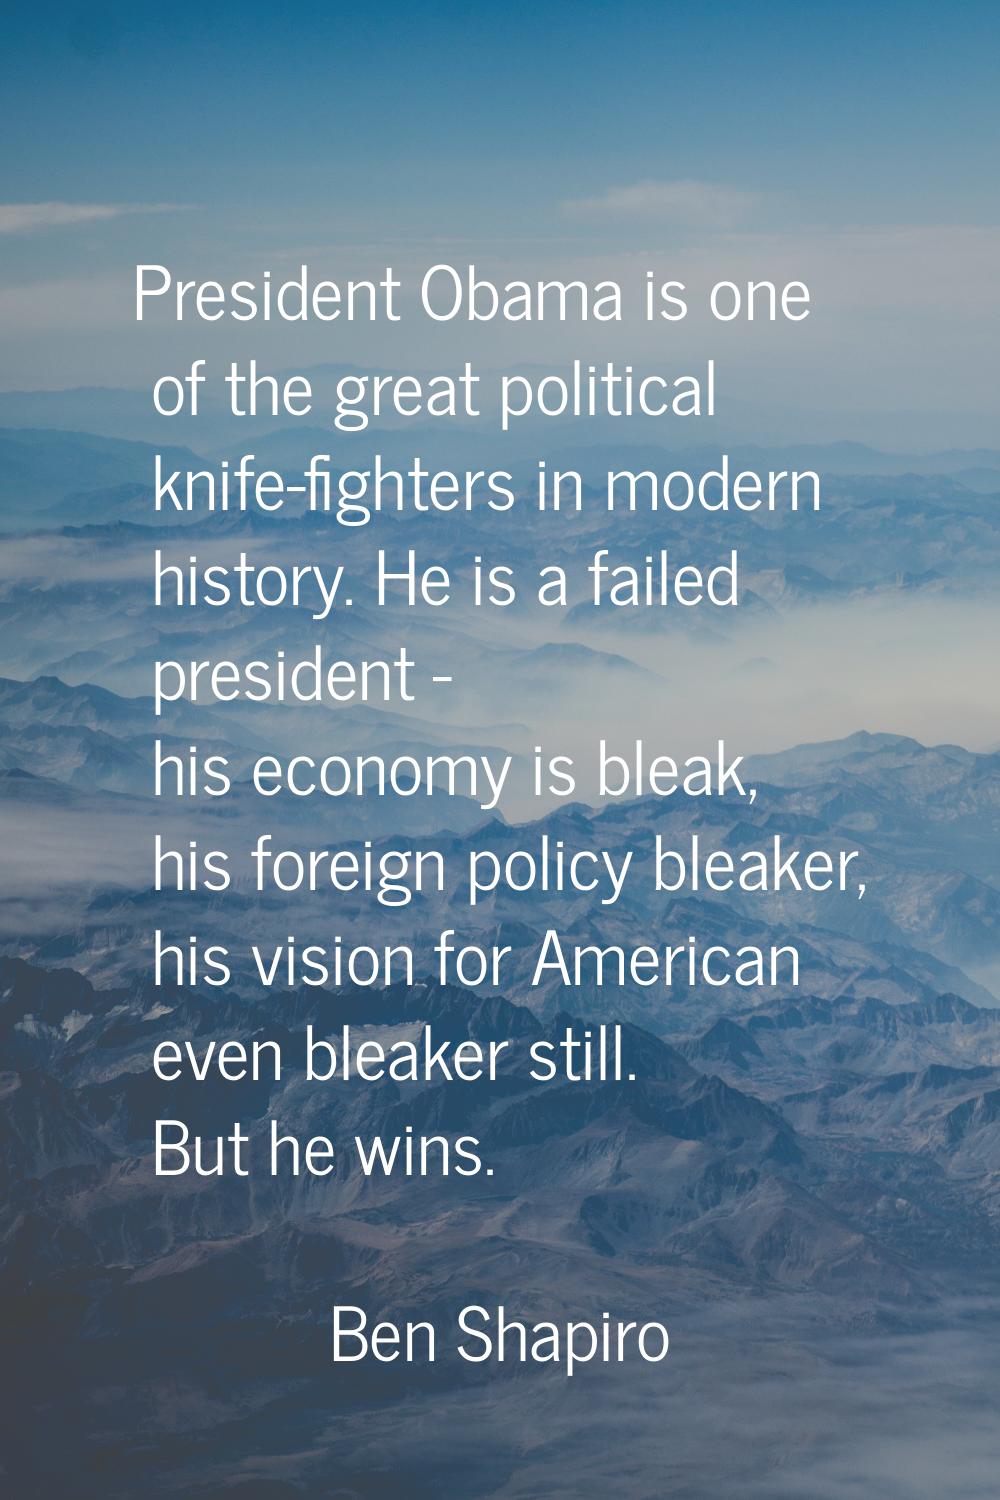 President Obama is one of the great political knife-fighters in modern history. He is a failed pres